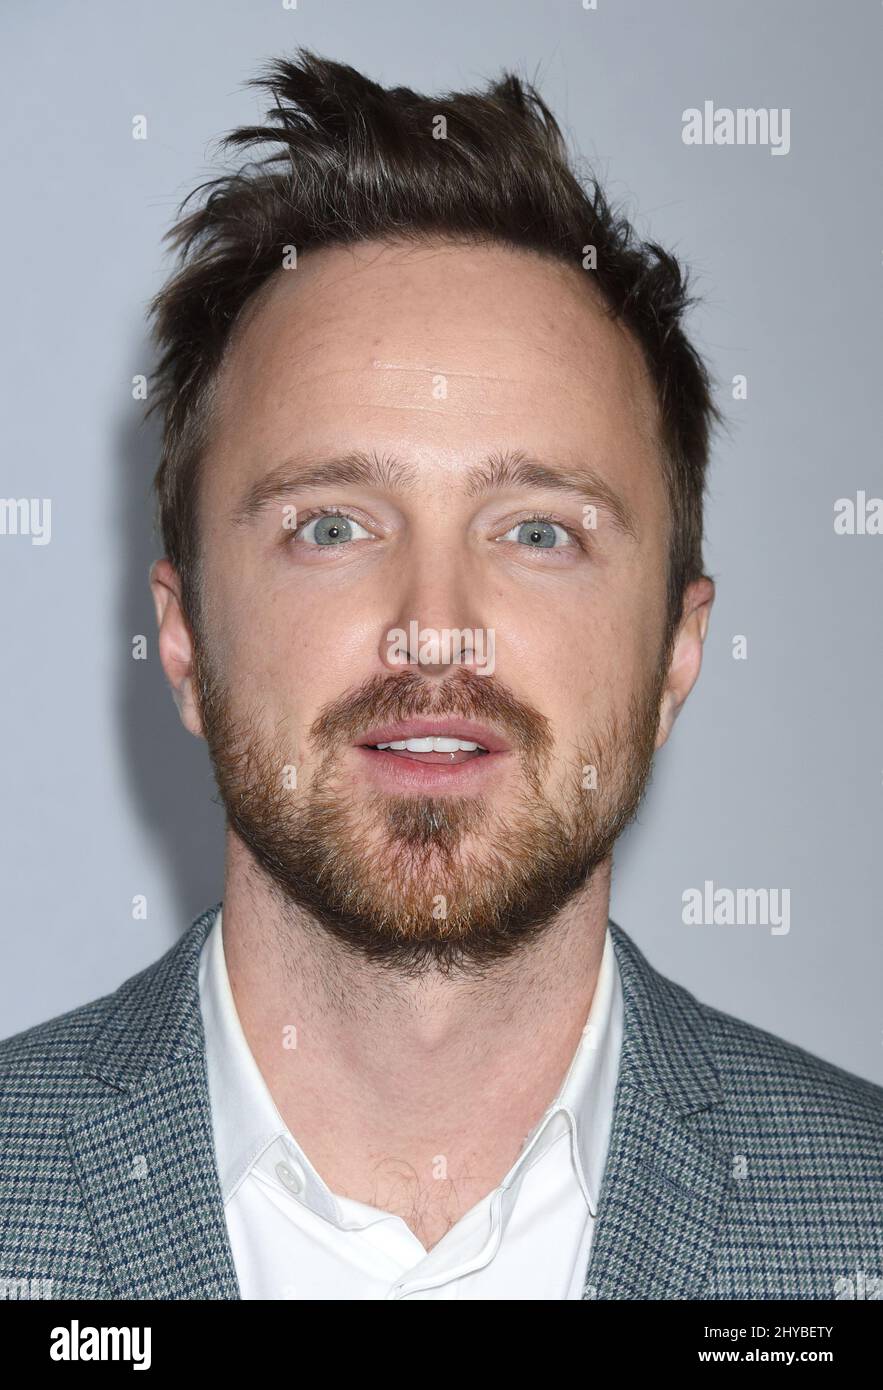 Aaron Paul attends Hulu's TCA All Stars Party held at the Langham Huntington Hotel Stock Photo